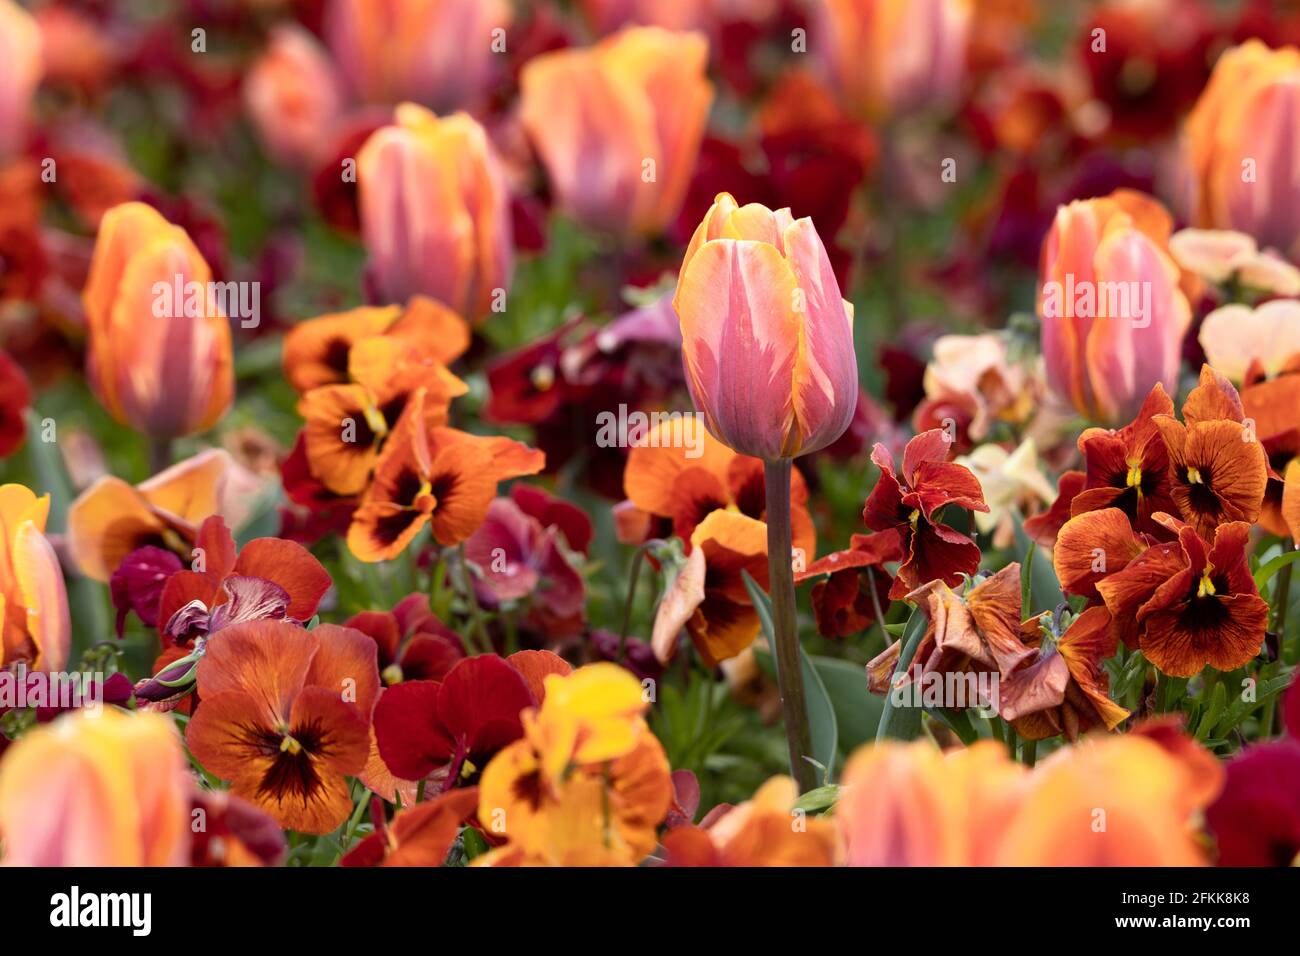 colorful fresh orange tulips in a bed of spring flowers blurred background Stock Photo